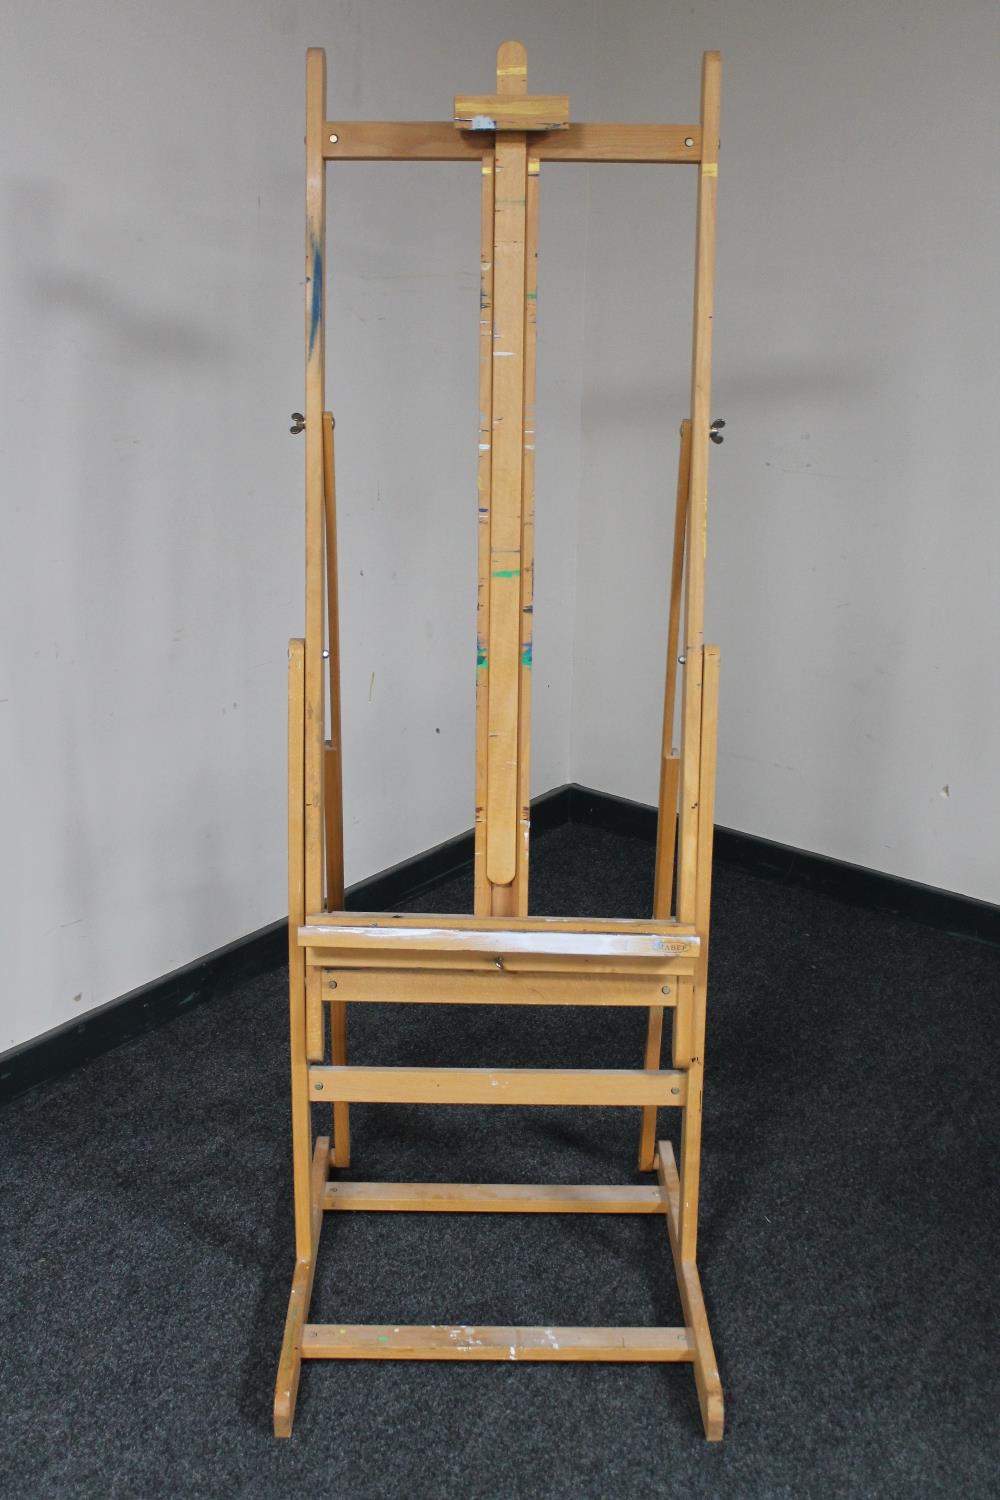 An artist's easel by Mabef